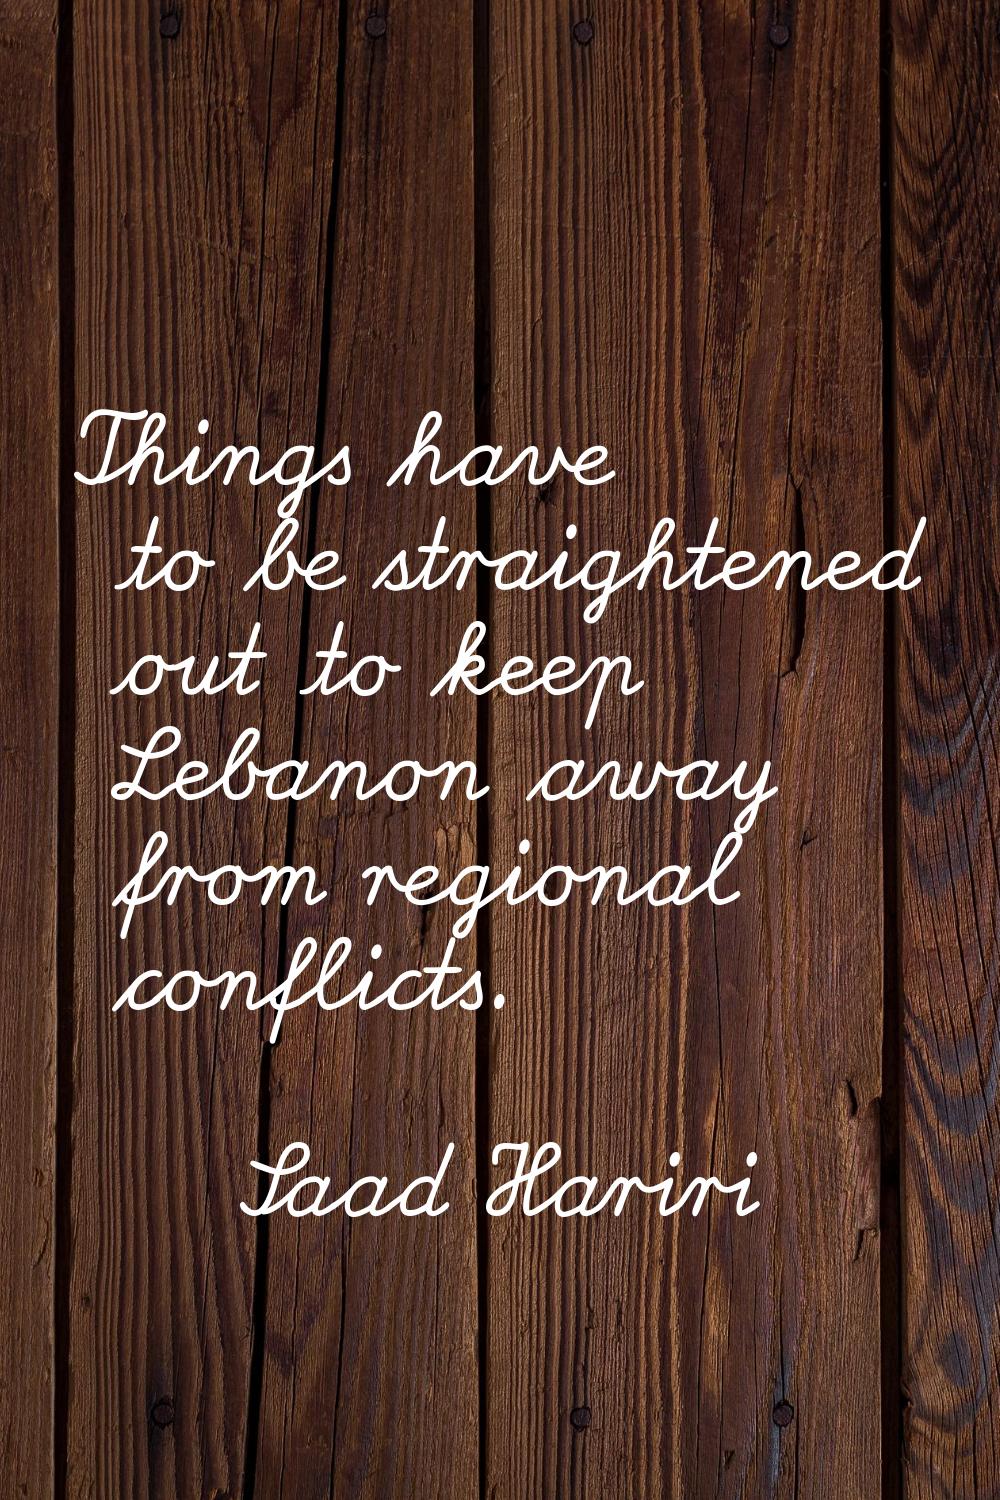 Things have to be straightened out to keep Lebanon away from regional conflicts.